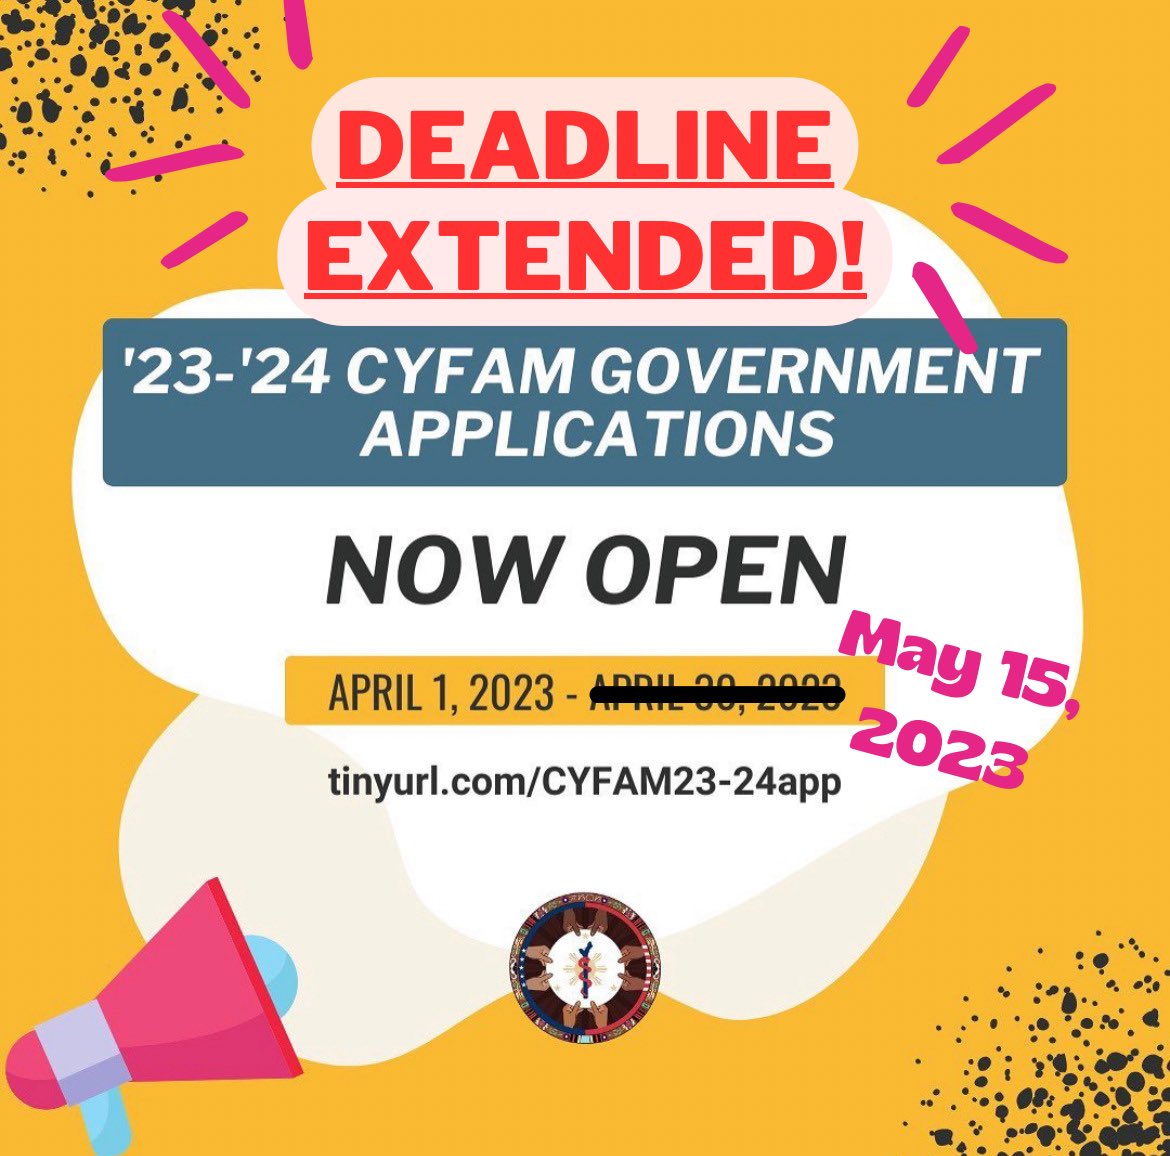 If you are interested in joining next year’s CYFAM National Government, this is your opportunity to submit an application! We are extending the deadline for applications to Monday, May 15, 2023.